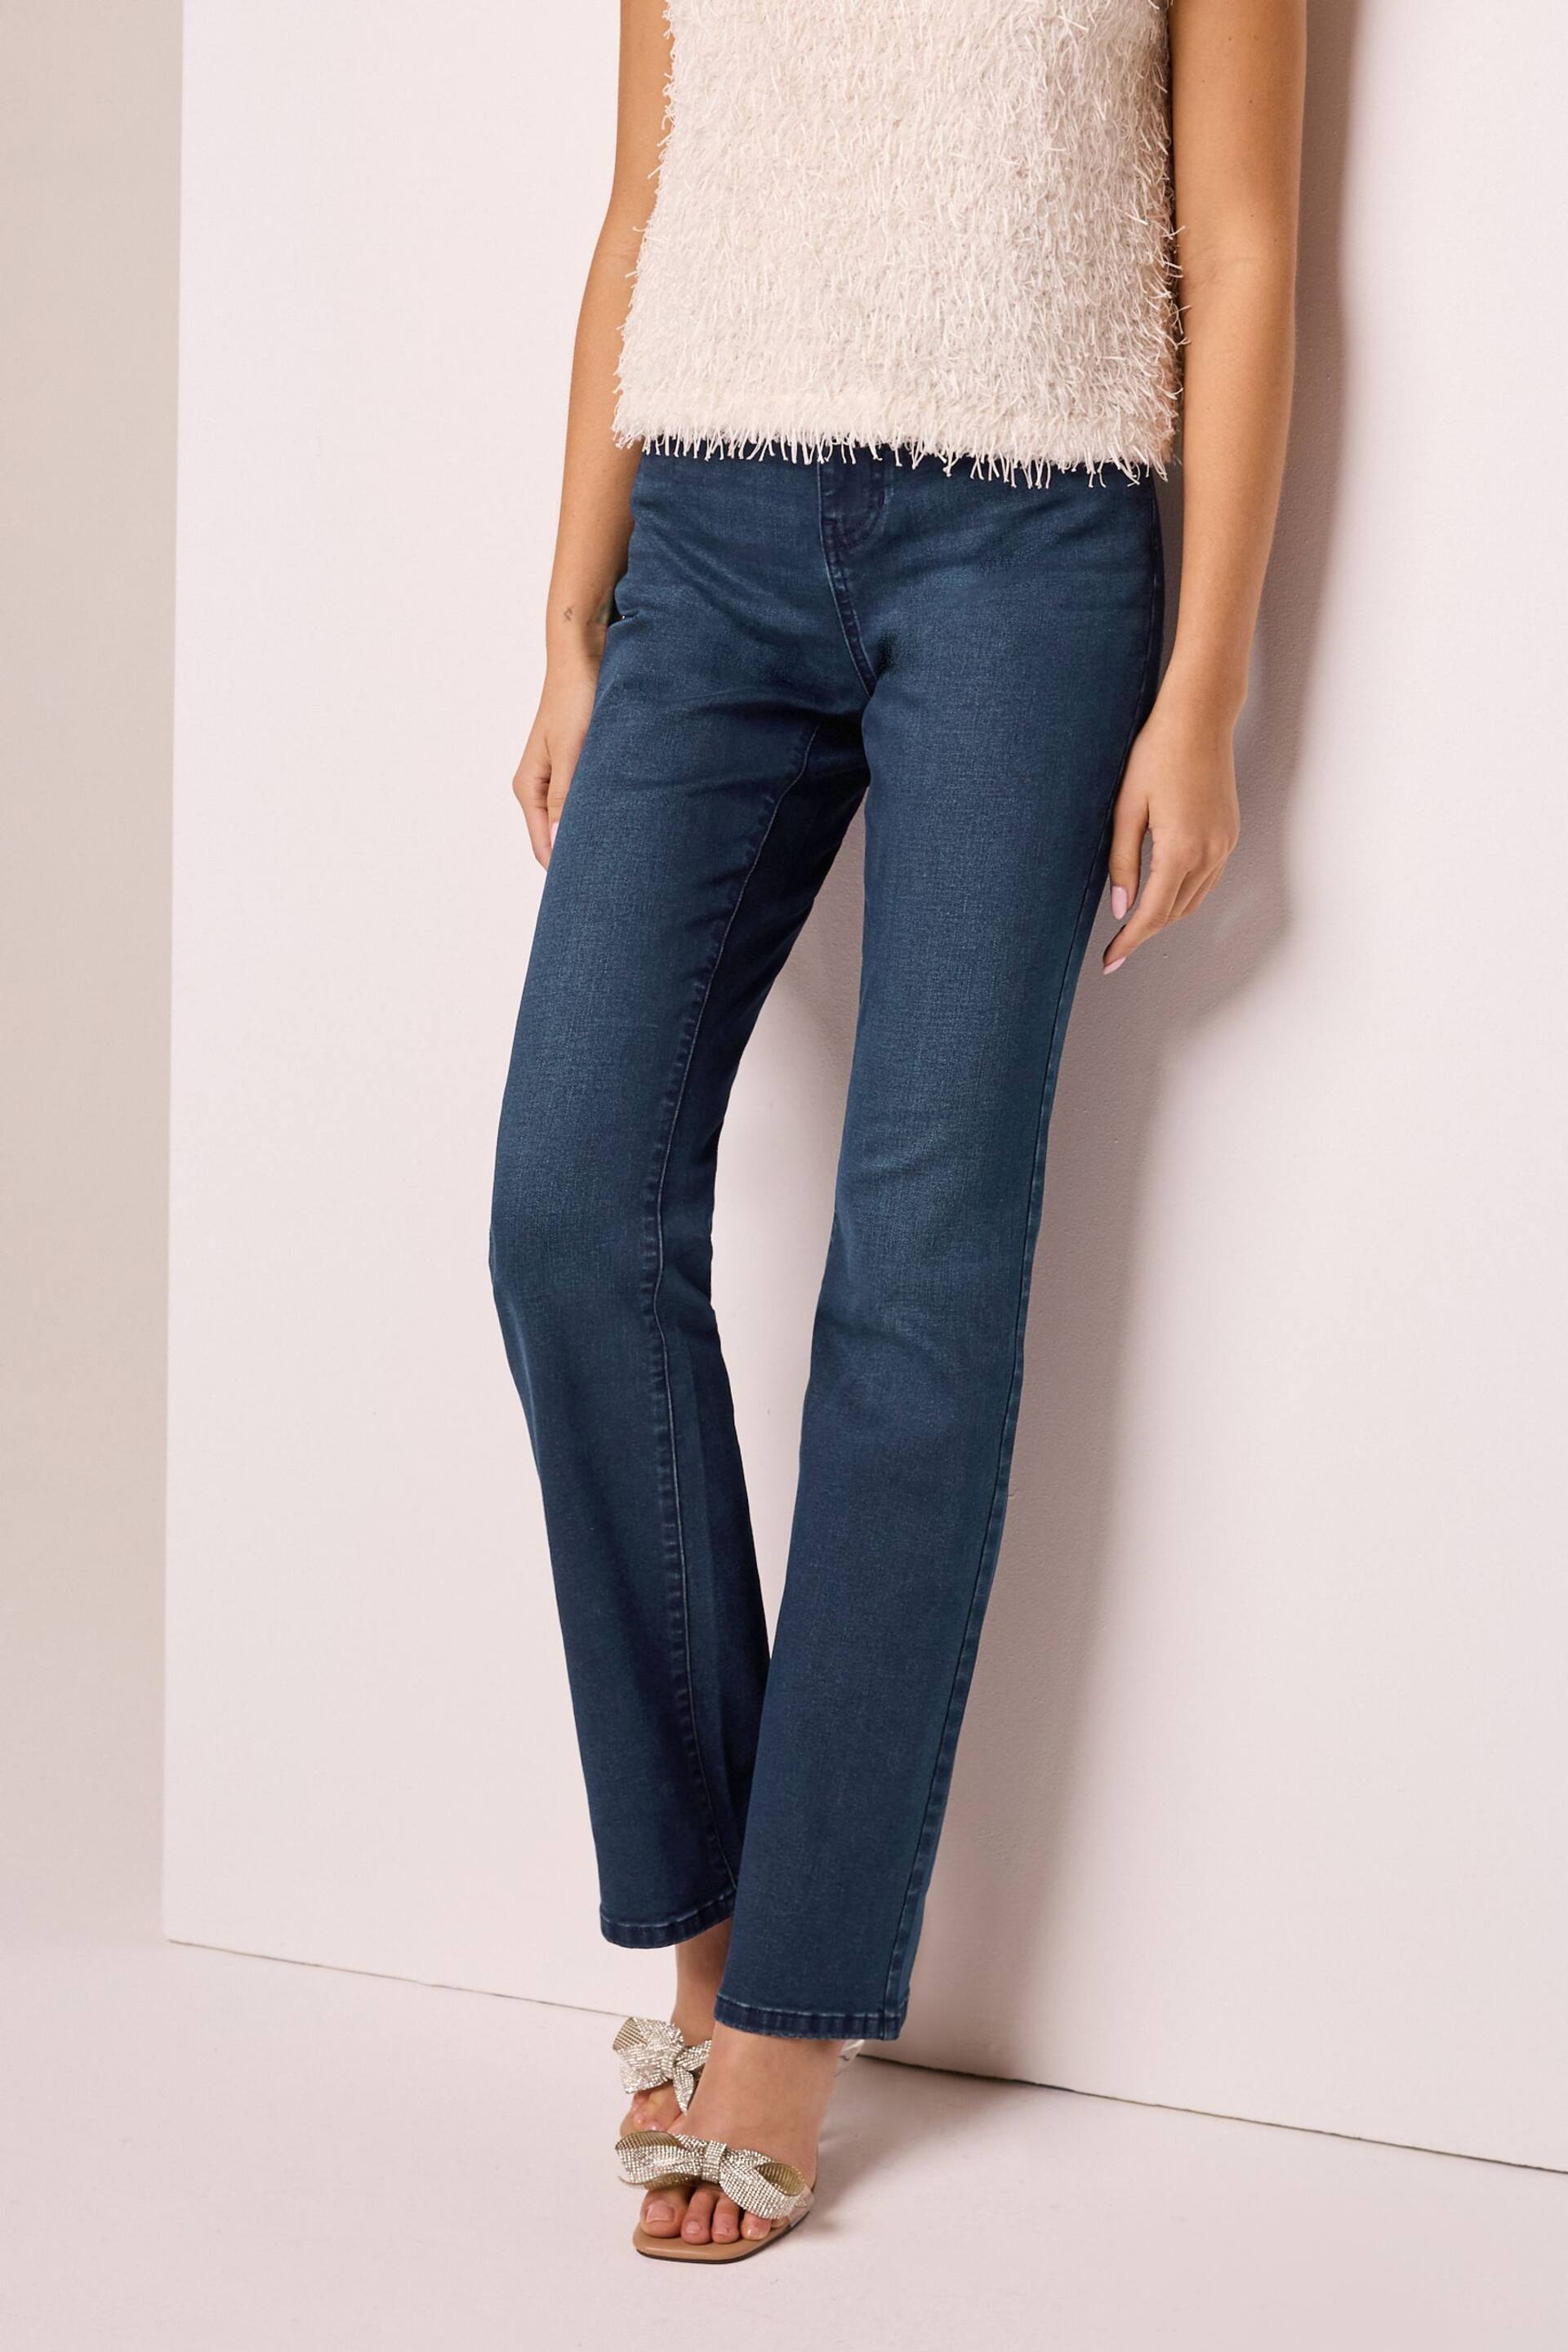 Inky Blue Wash Bootcut Jeans - Image 4 of 6